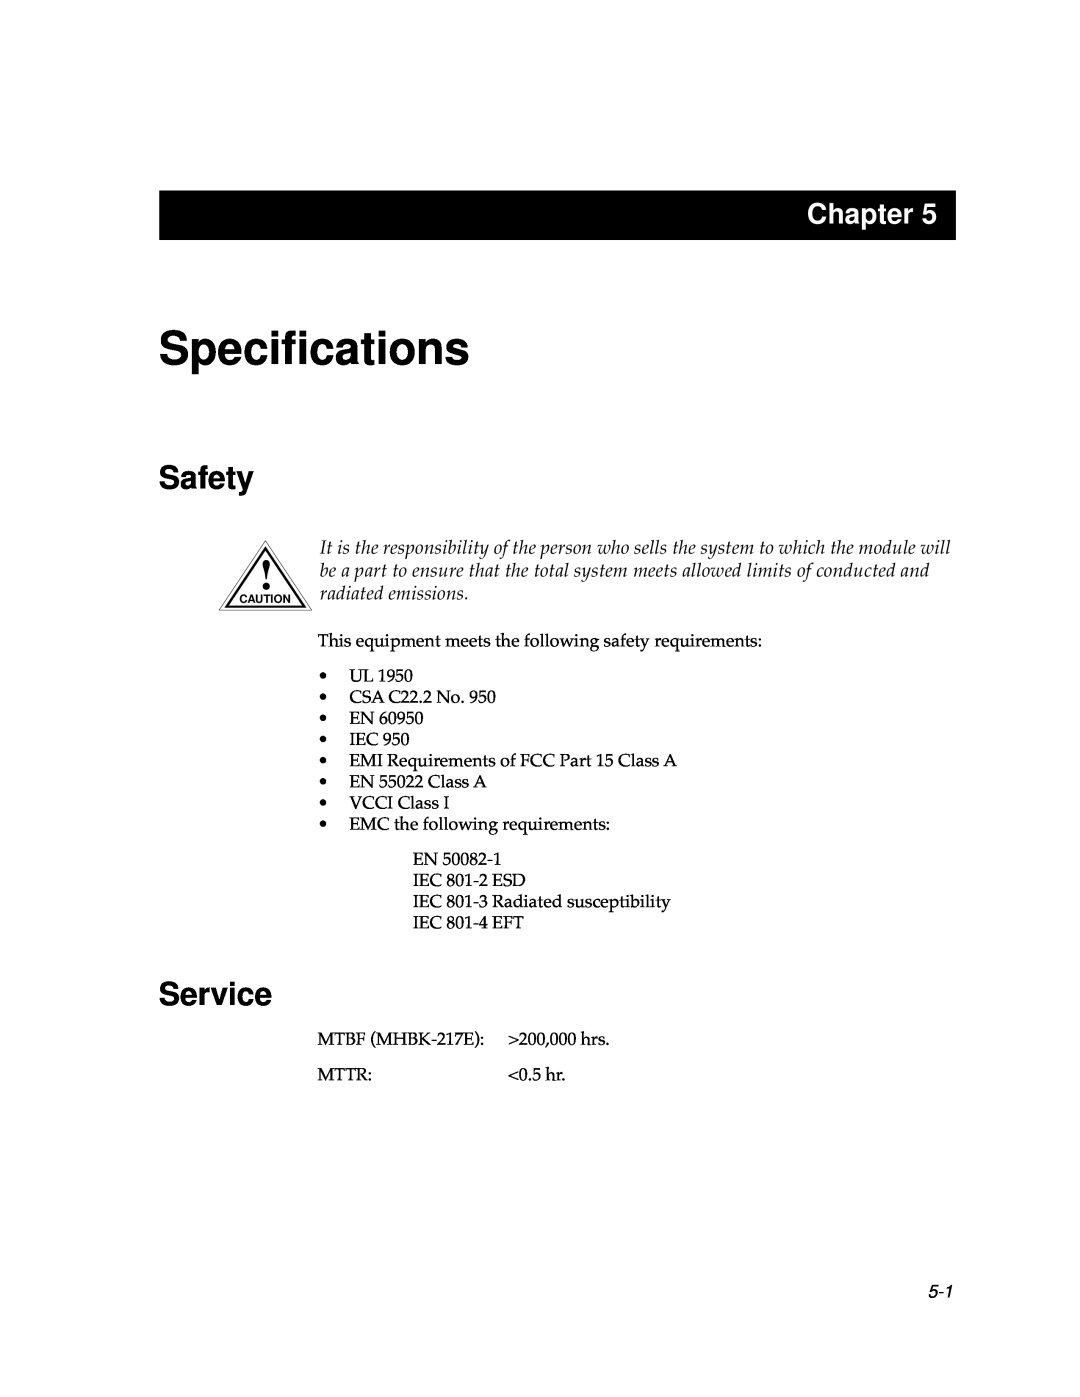 Cabletron Systems 9F106-01 manual Speciﬁcations, Safety, Service, Chapter 